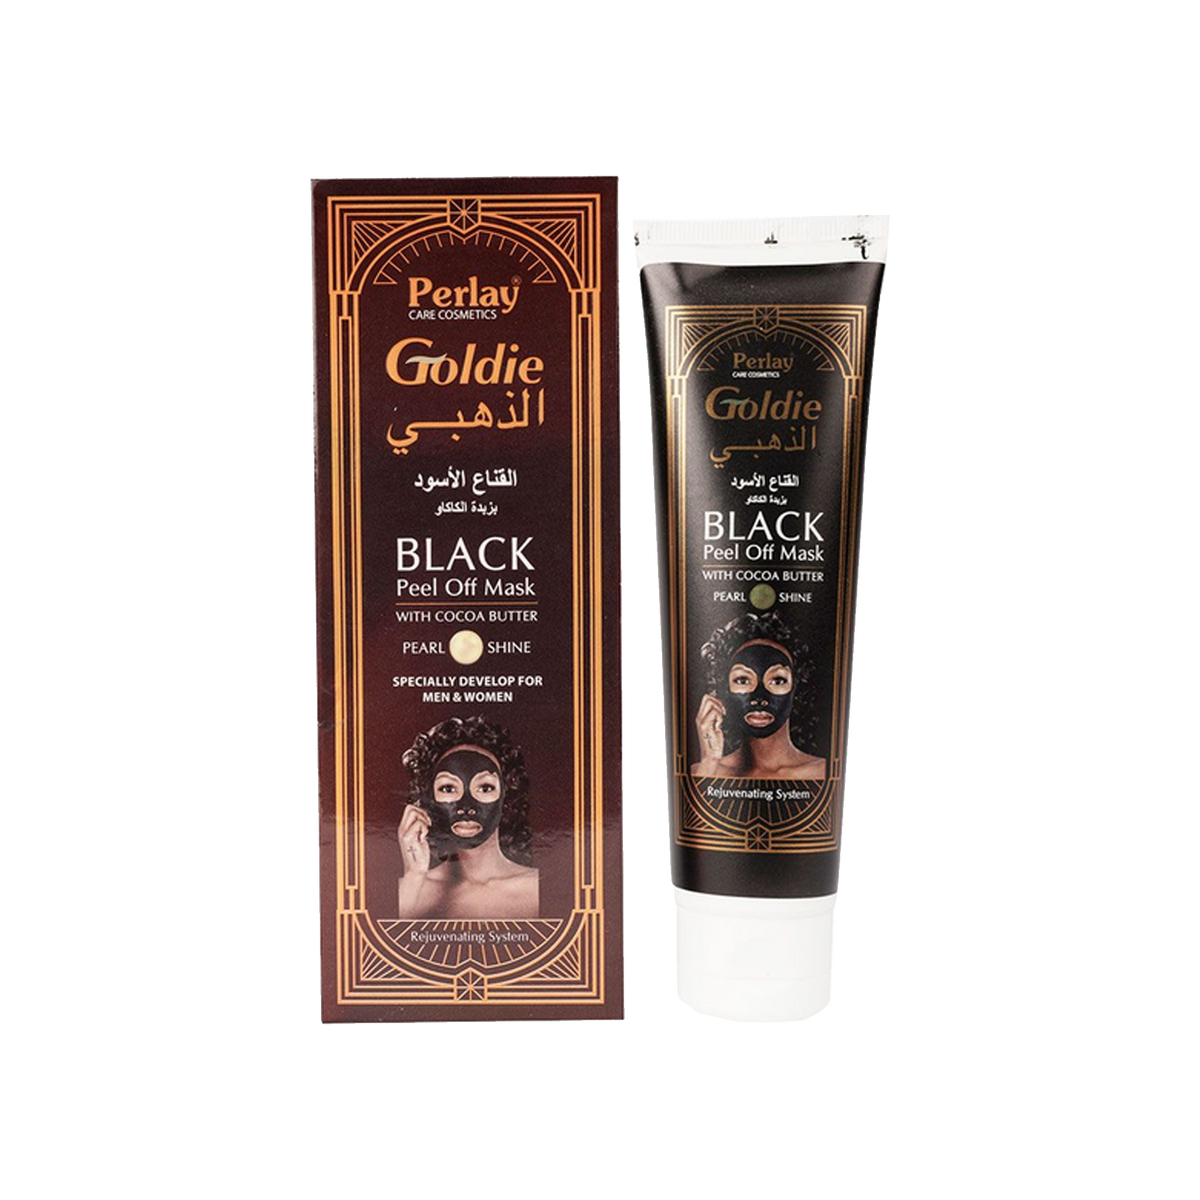 Perlay Goldie Black Peel Off Mask With Cocoa Butter 100ml